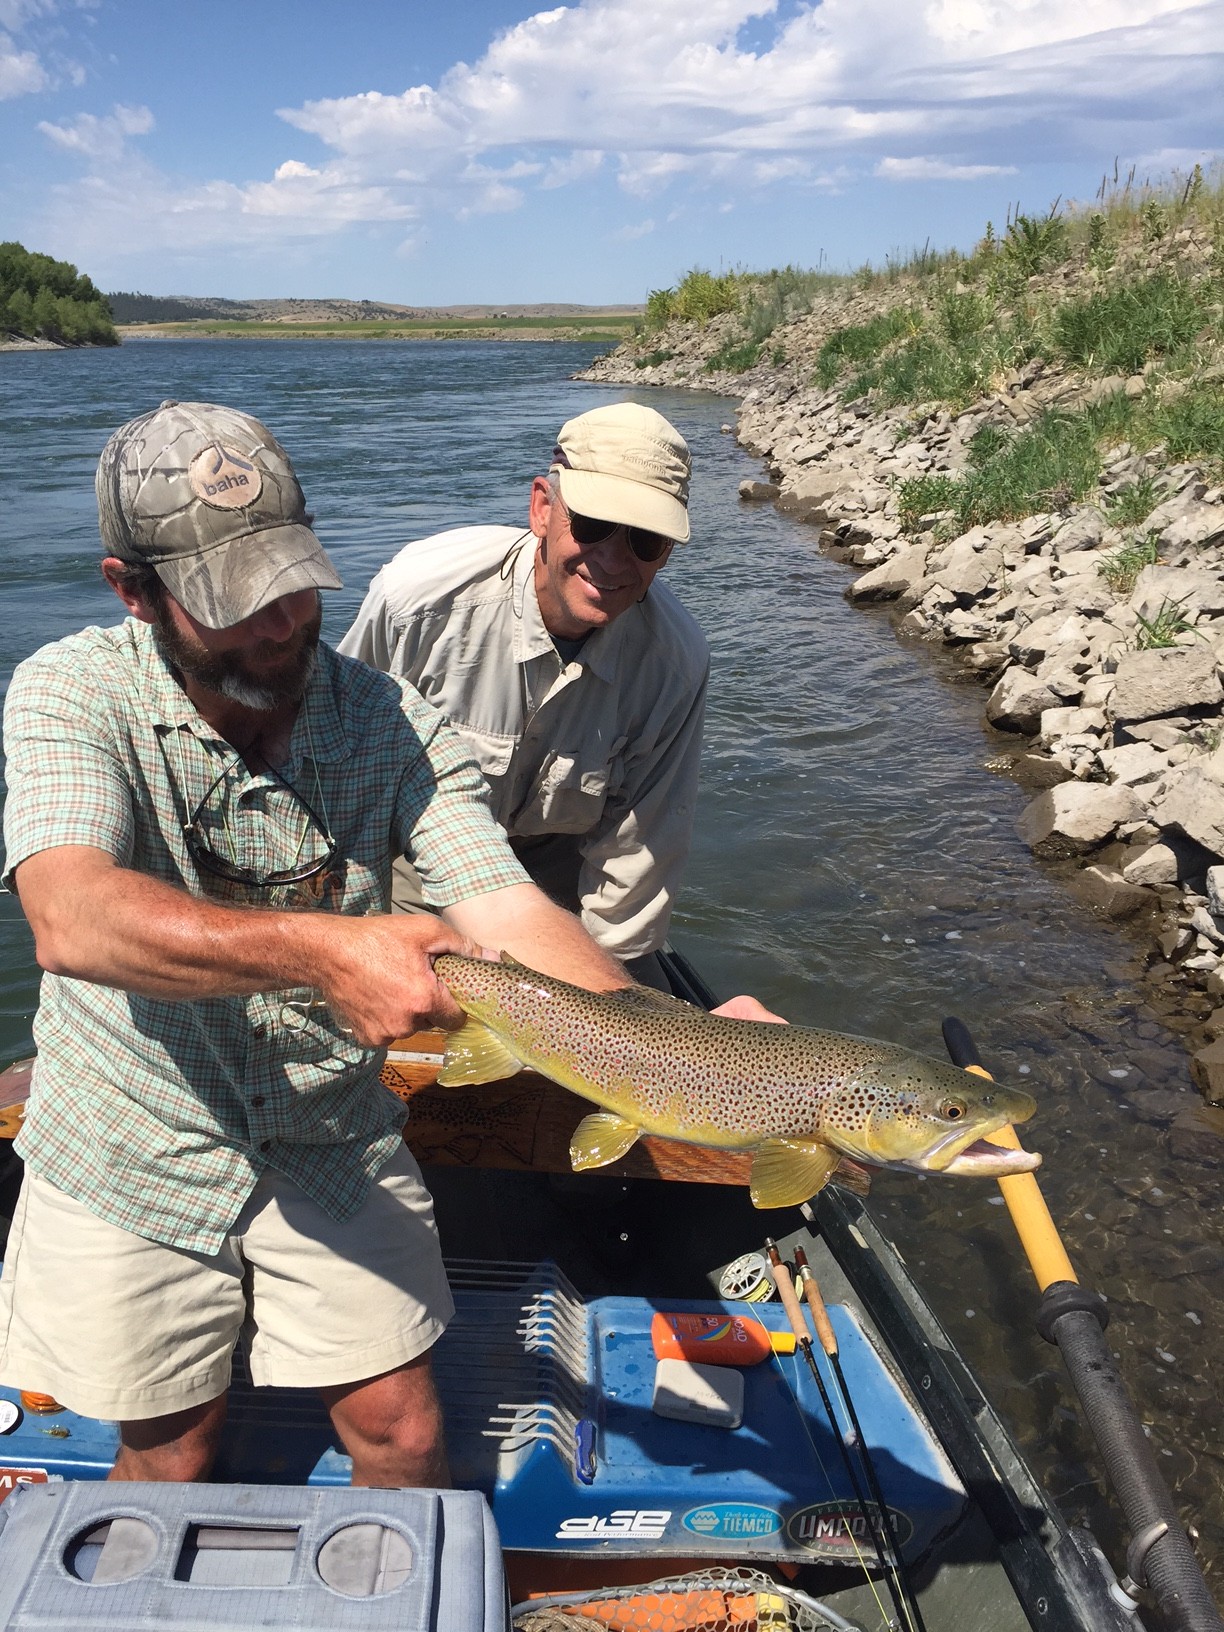 After some work on the hook setting and line management, Richard Hansen landed this beautiful brown two days ago in the Lower Yellowstone